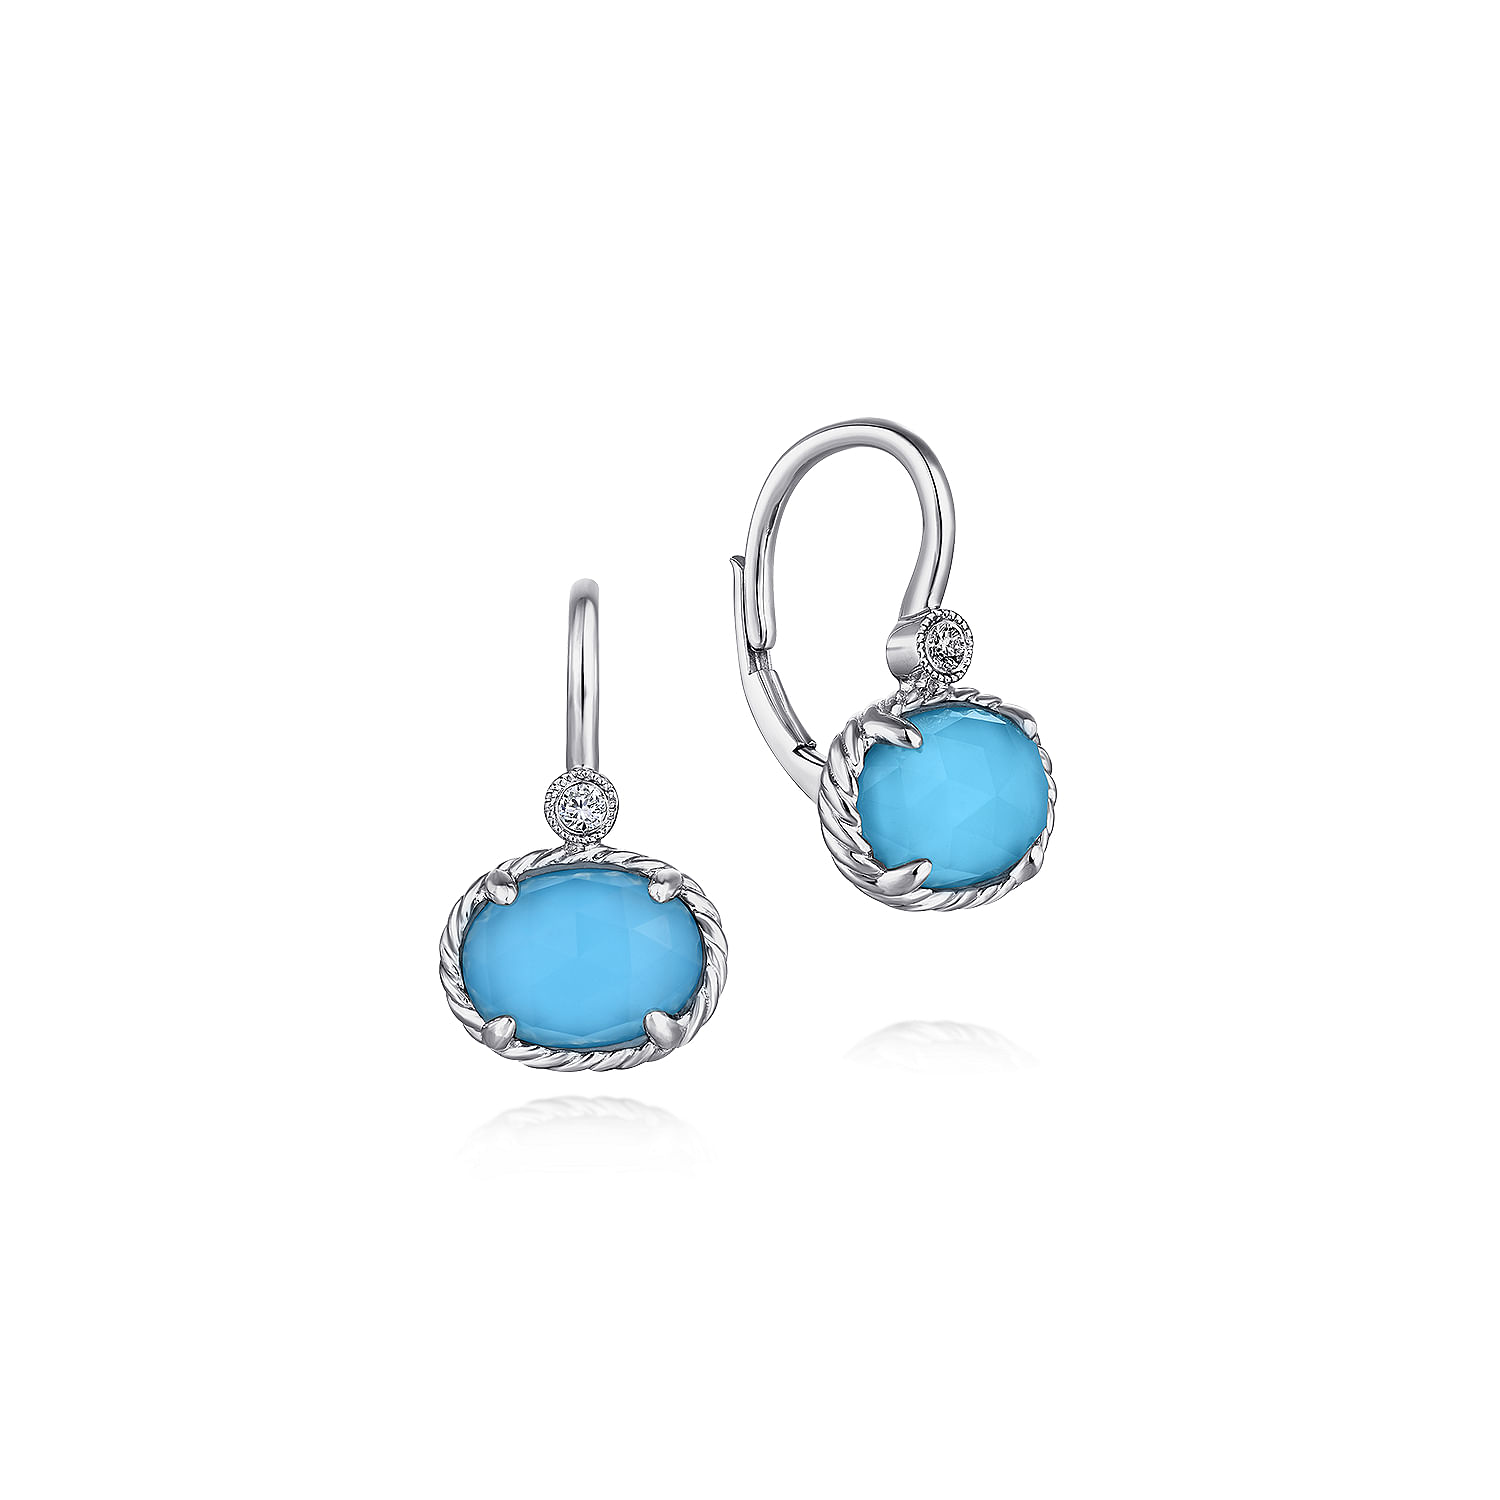 14K White Gold Rock Crystal/Turquoise and Diamond Drop Earrings